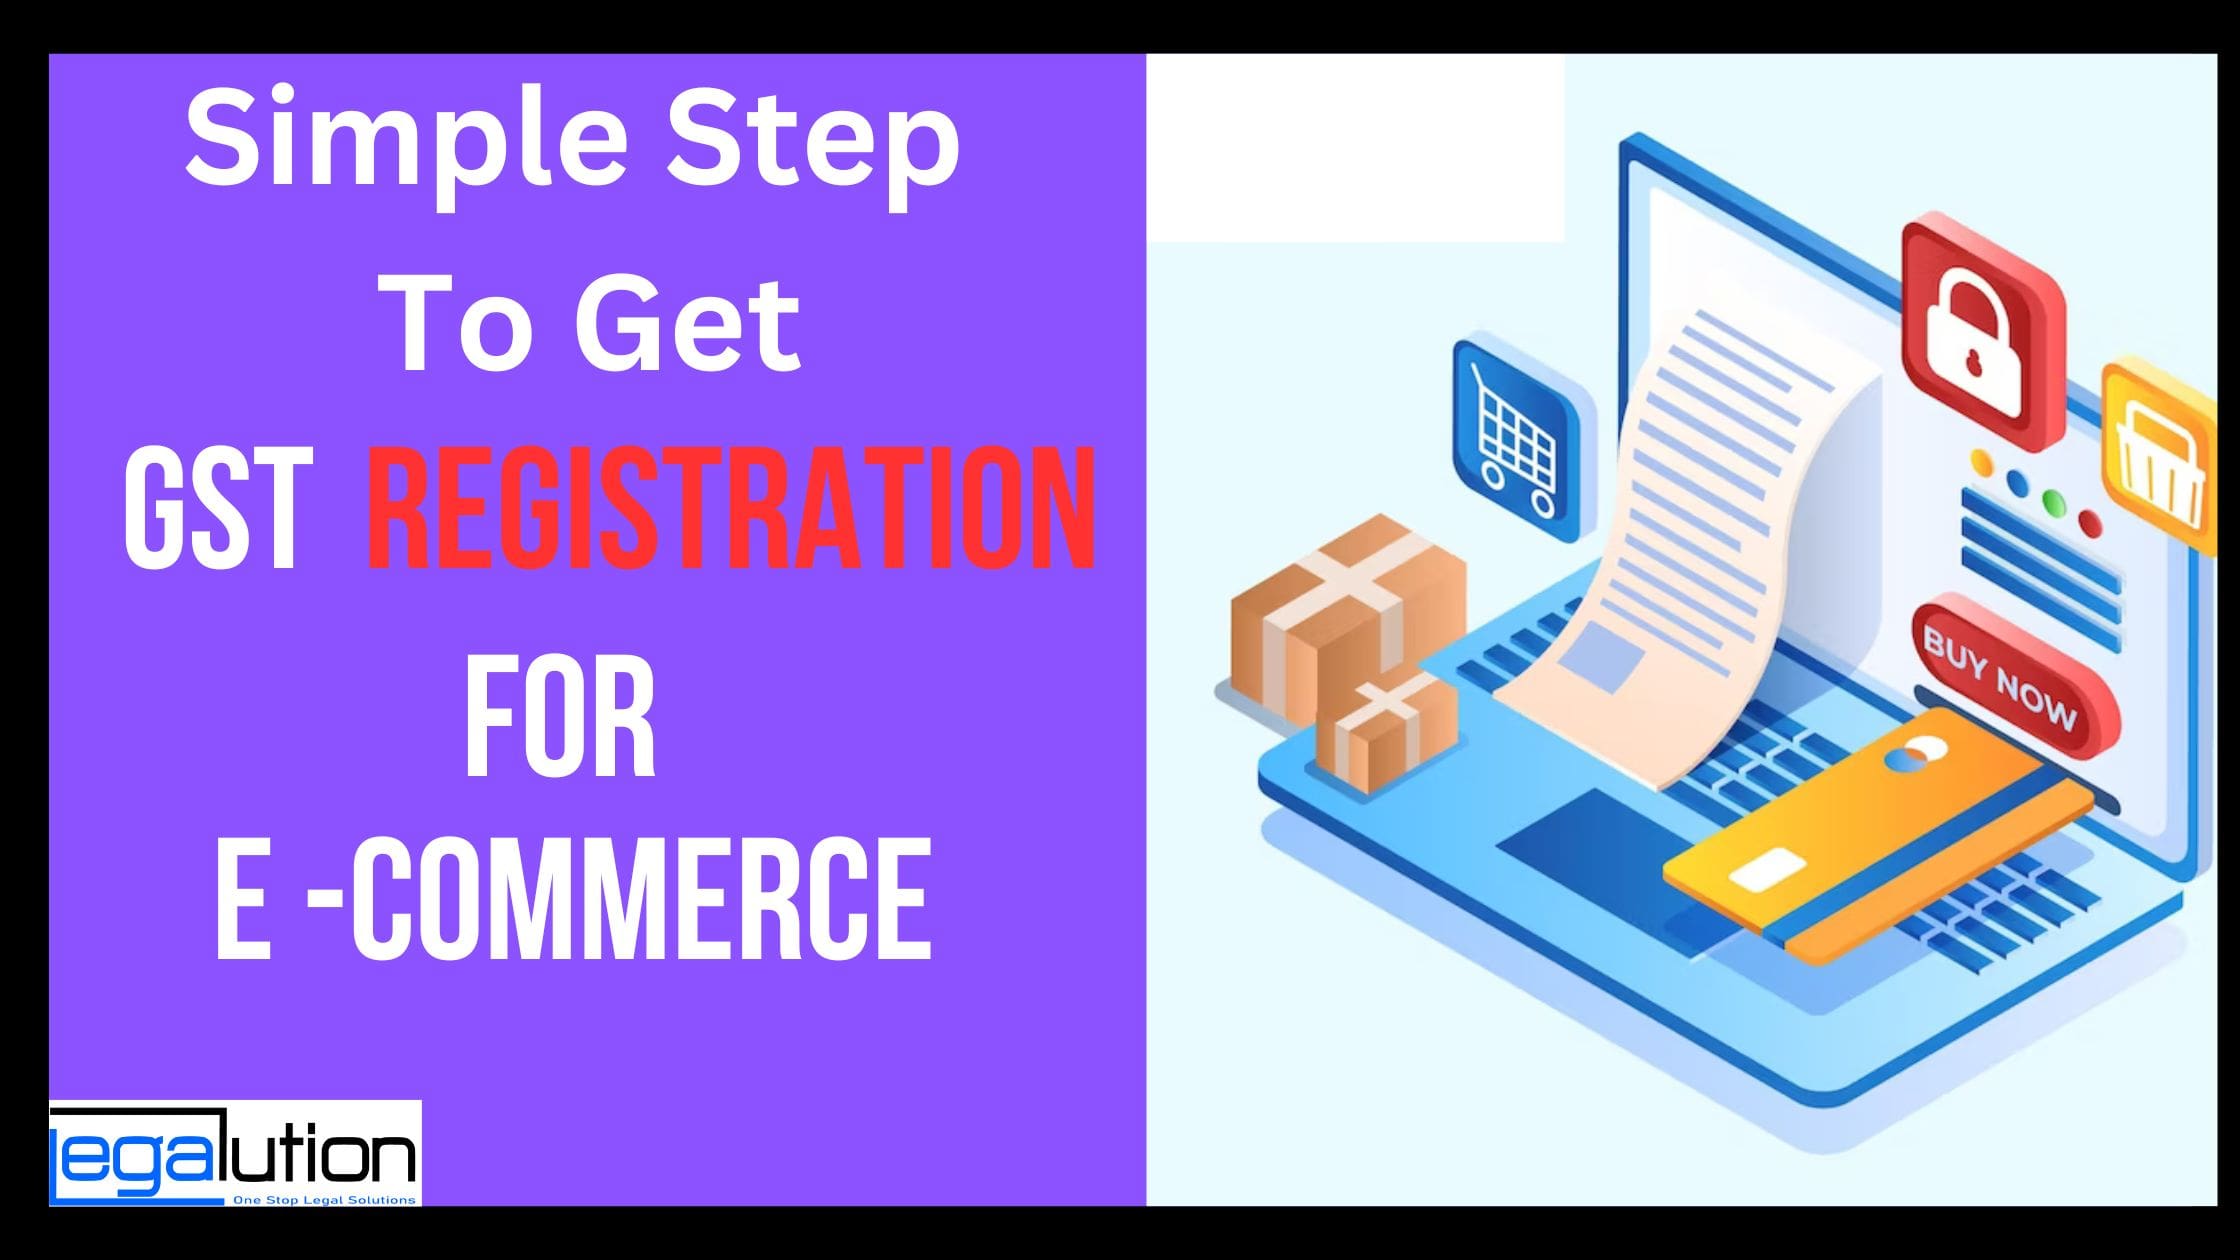 A Detailed guidelines on GST Registration for E-Commerce Business